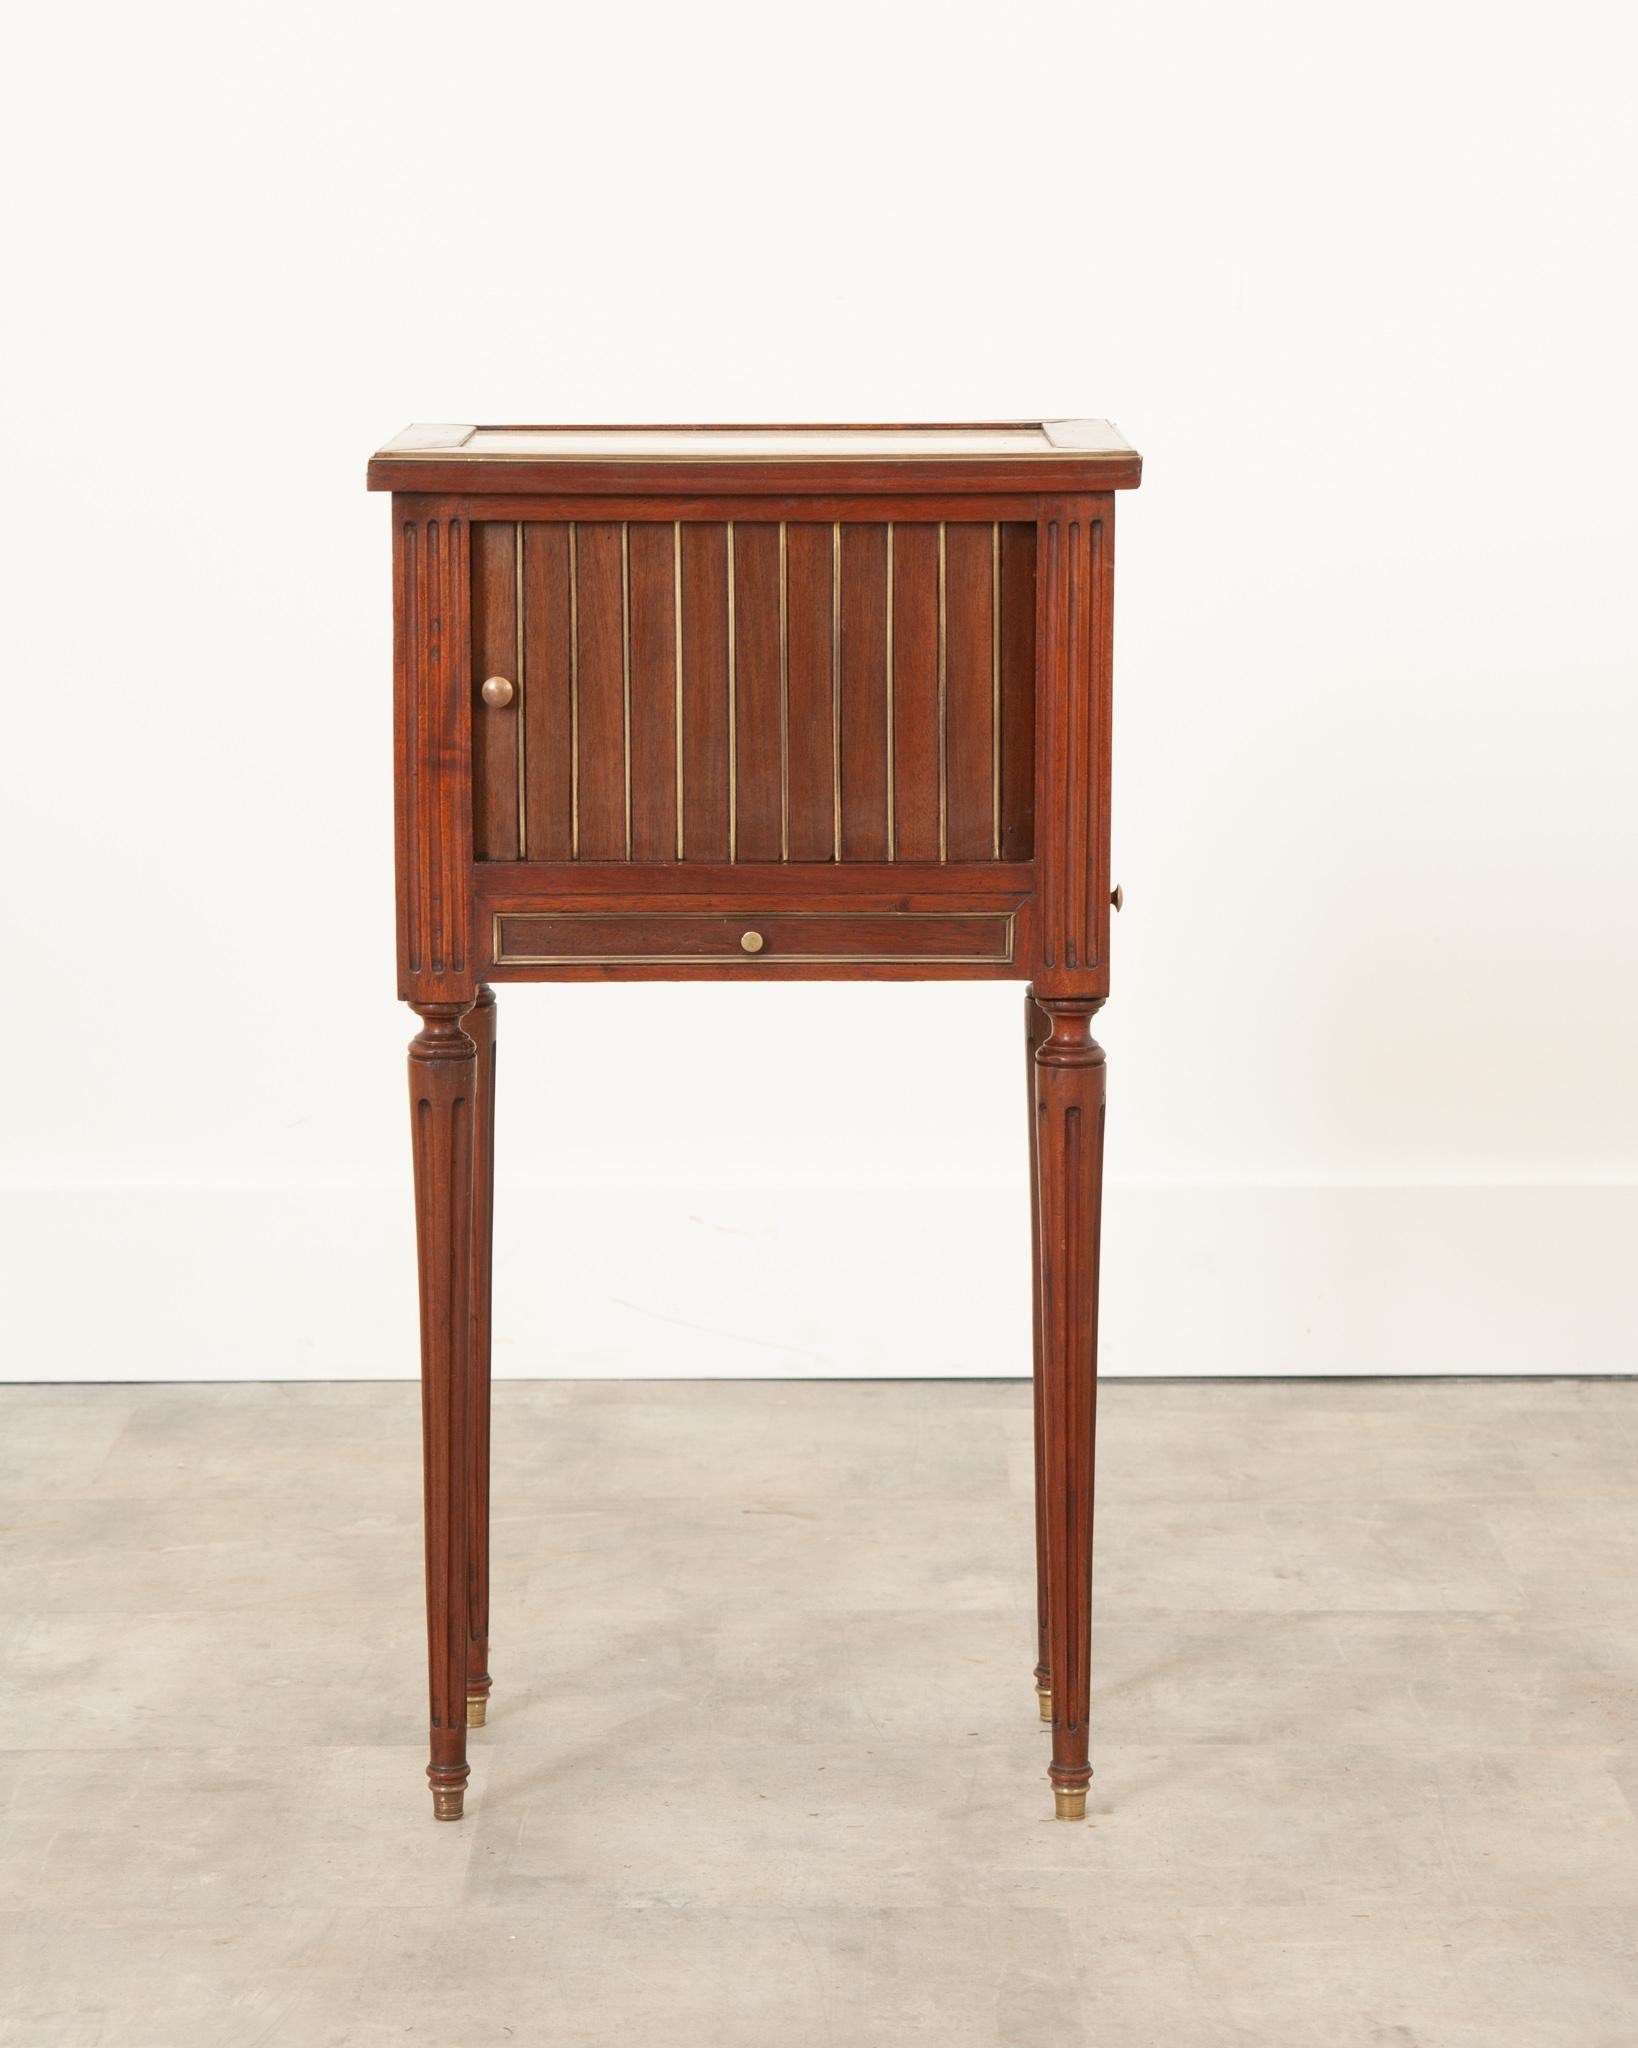 This fantastic little mahogany bedside table was made in 19th Century France, in the Louis XVI style. A white marble top is framed in mahogany which has been trimmed in brass. Brass trim can be found around all panels and drawers. The main cavity is